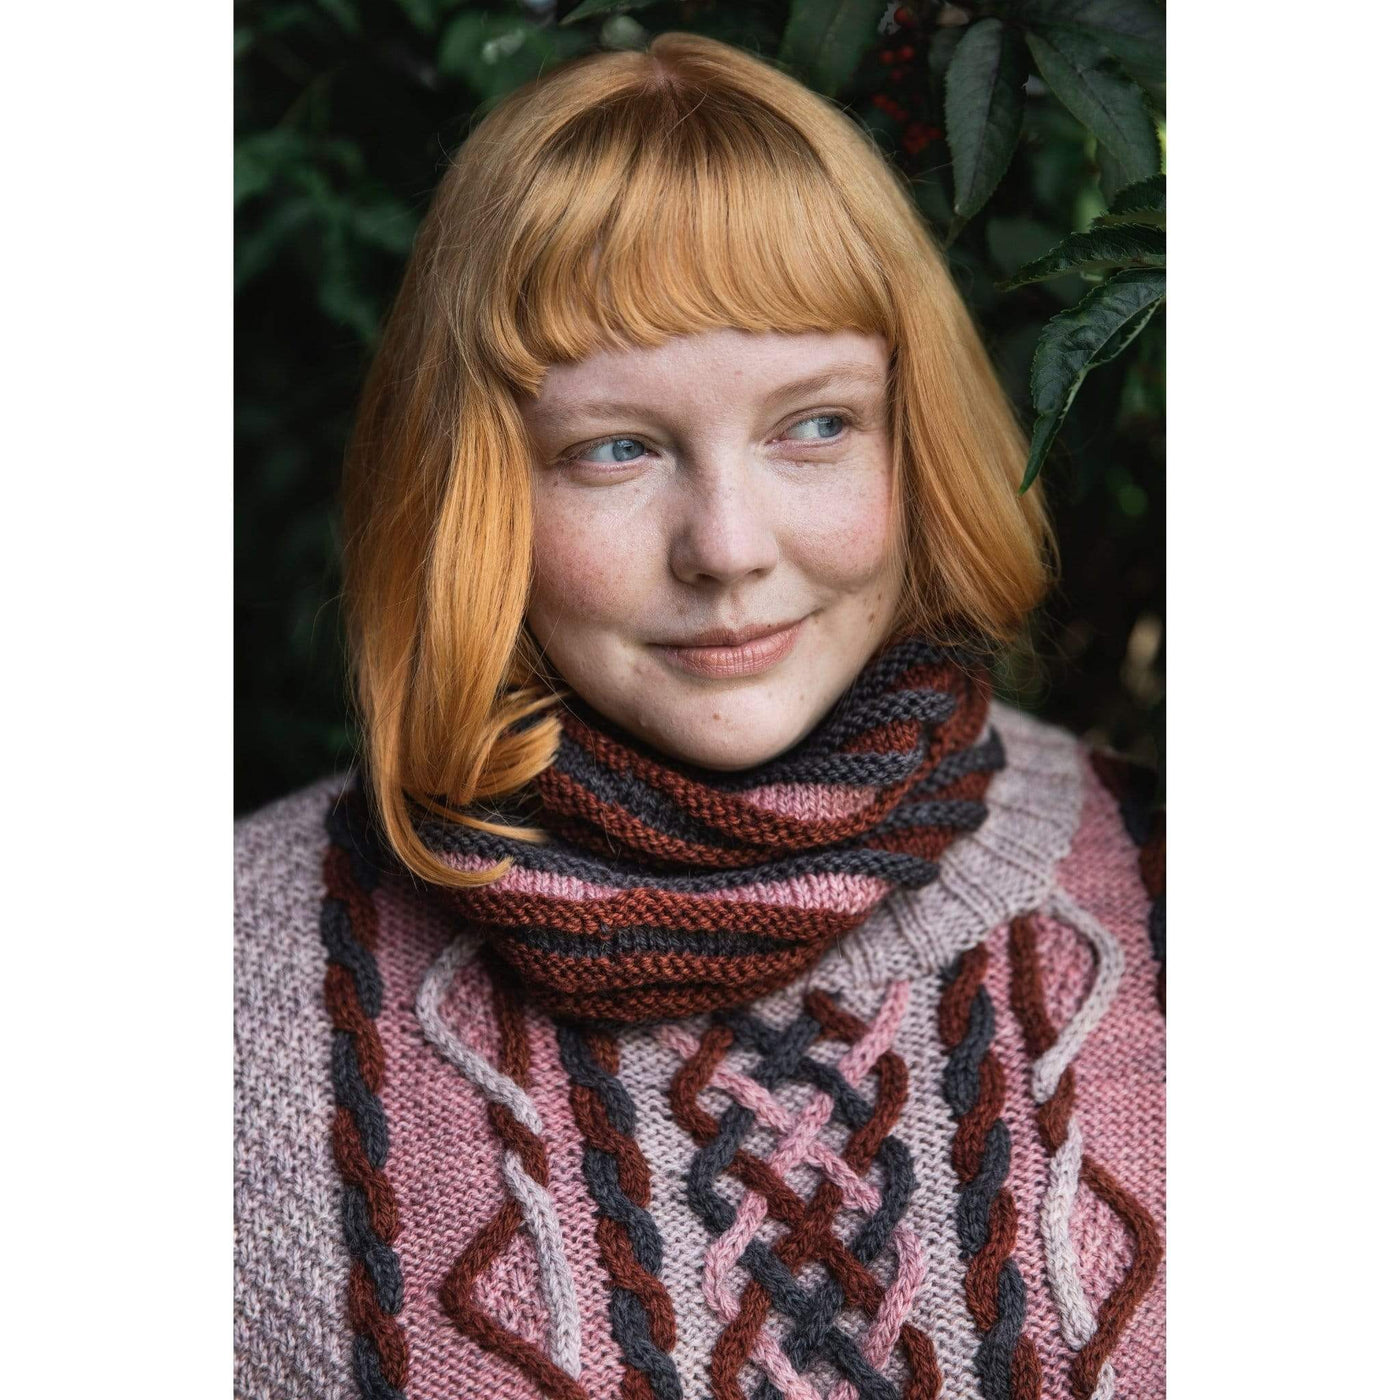 The Woolly Thistle Worsted – A Knitwear Collection Curated by Aimée Gille of La Bien Aimée published by Laine woman wearing knitted pink sweater 